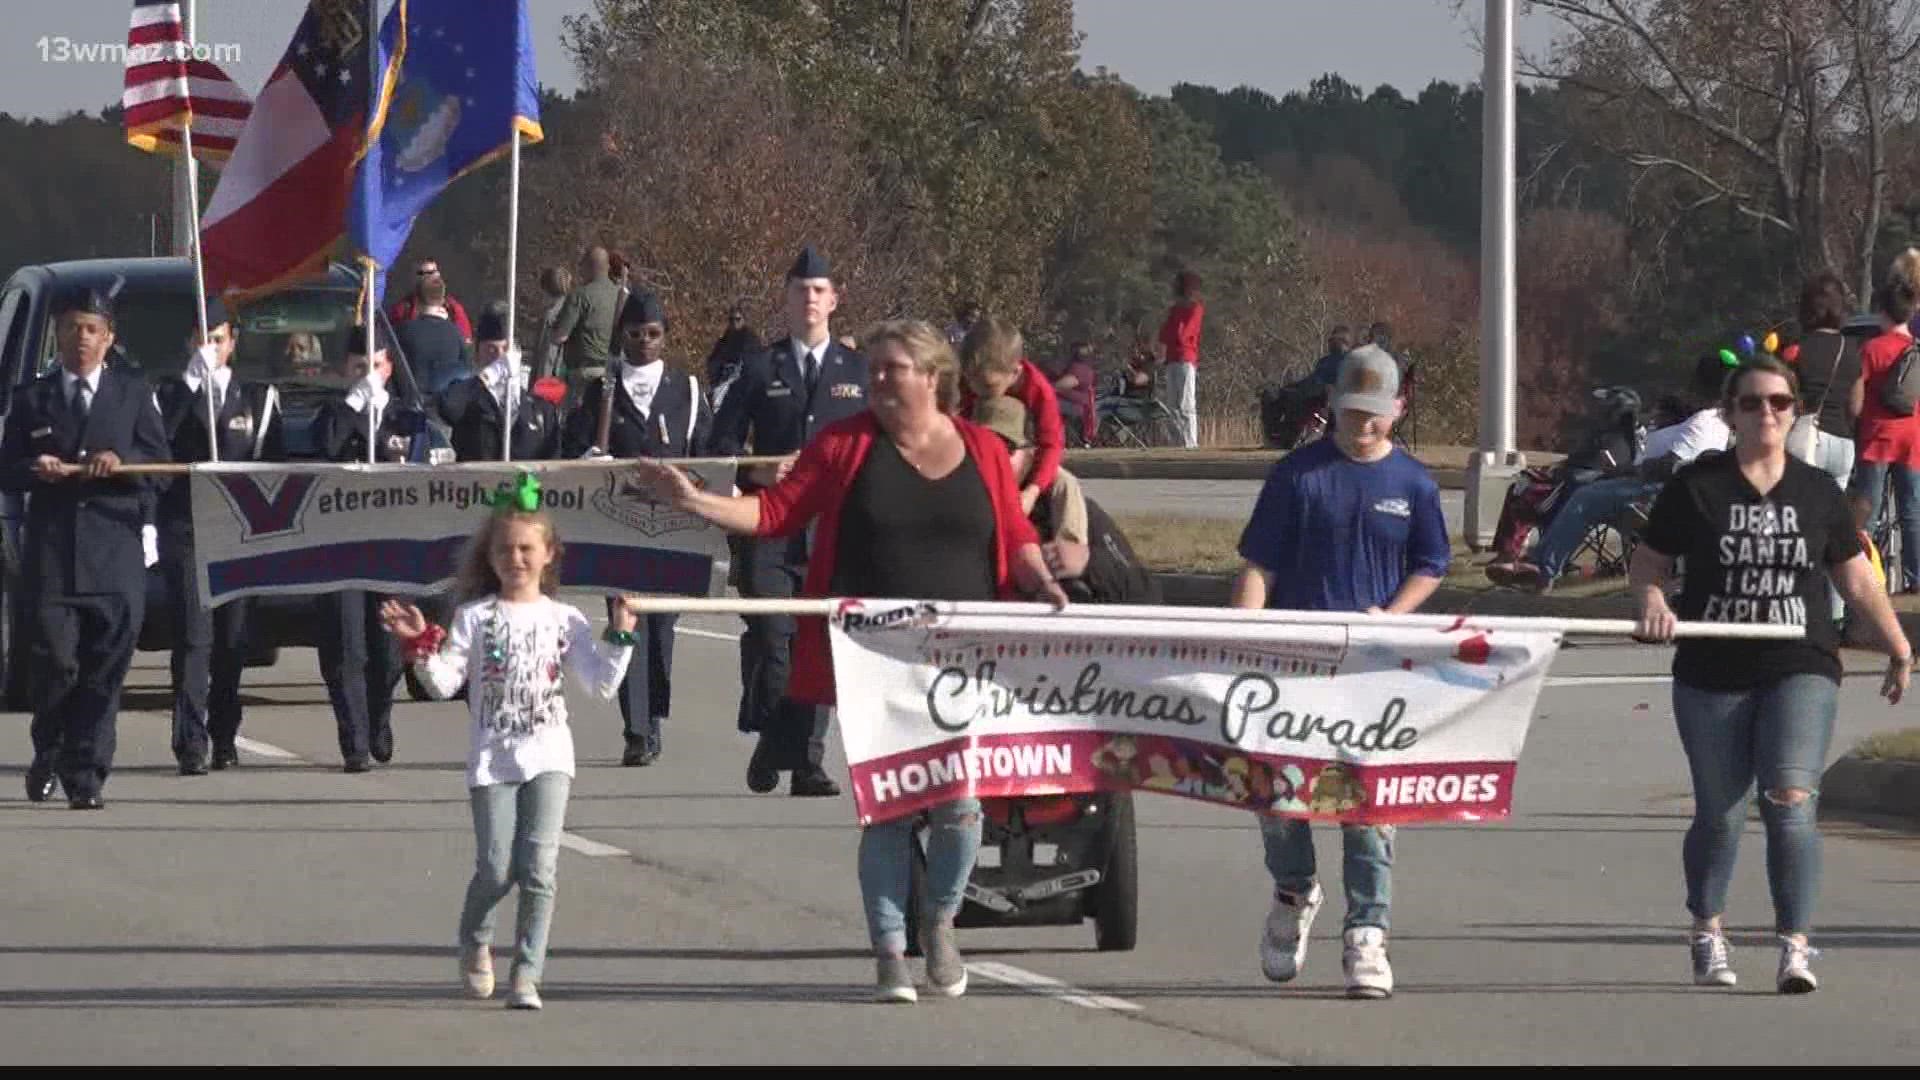 Mayor Patrick announced that the city's annual Christmas parade is heading back to its traditional site.